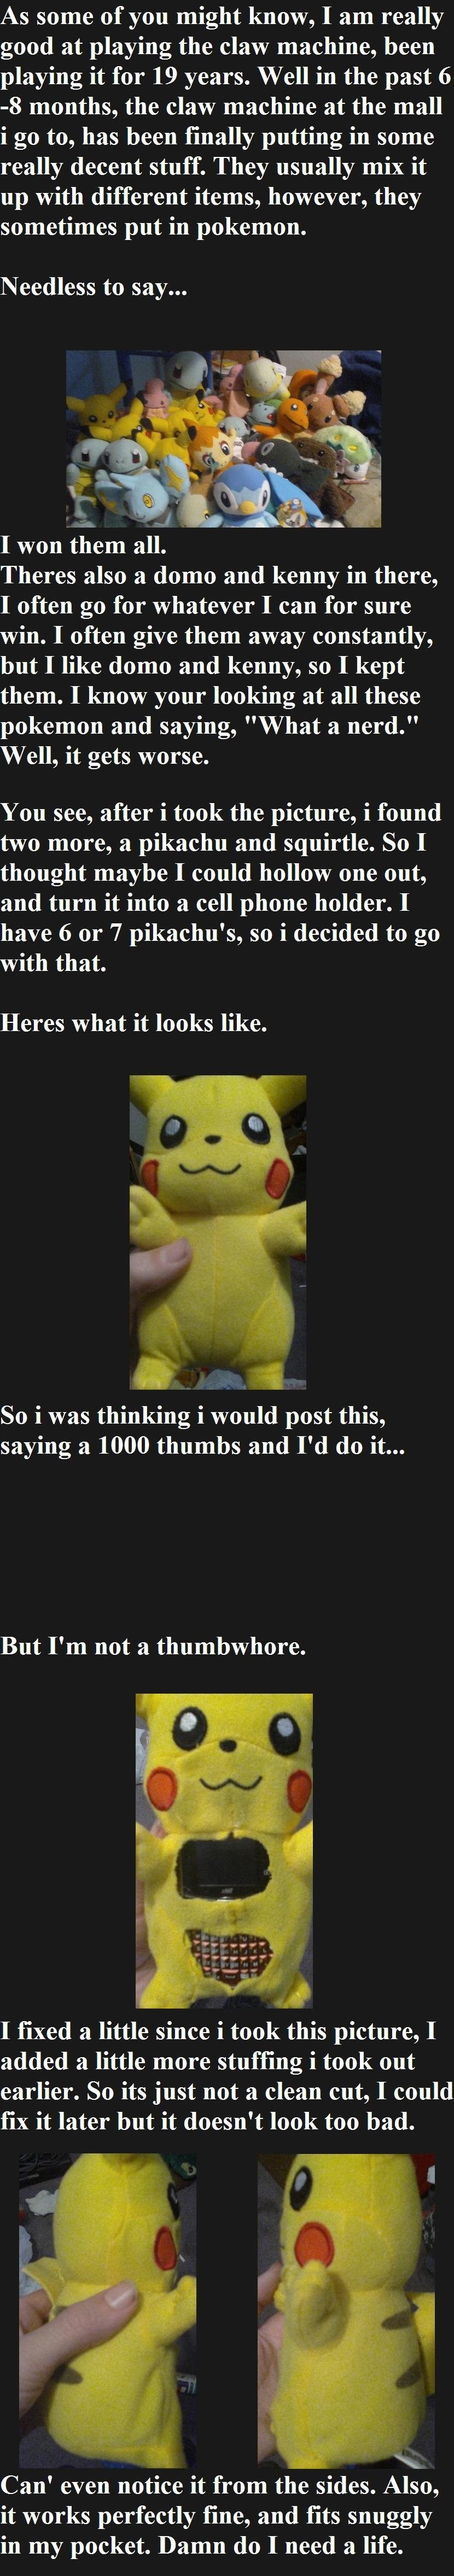 https://funnyjunk.com/funny_pictures/1424576/Pikachu/. .. If you actually follow the link posted as the title, this is a repost from 9 years ago. Take notice that there isn't a Pokemon in that whole pile newer than Gen